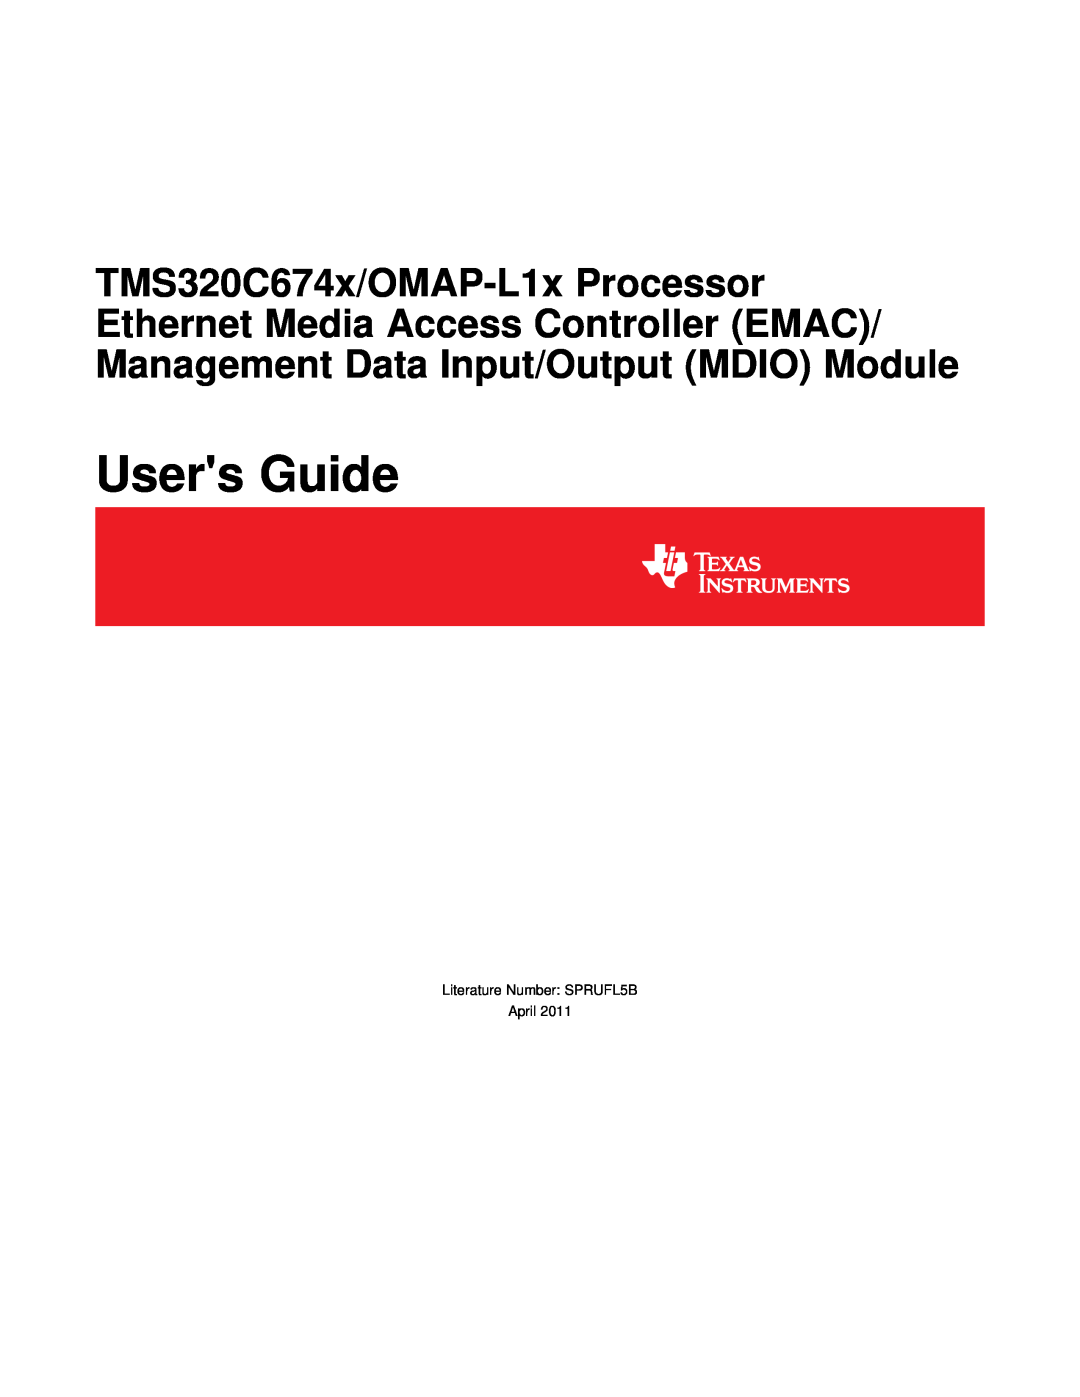 Texas Instruments TMS320C674X manual Users Guide, TMS320C674x/OMAP-L1x Processor Ethernet Media Access Controller EMAC 